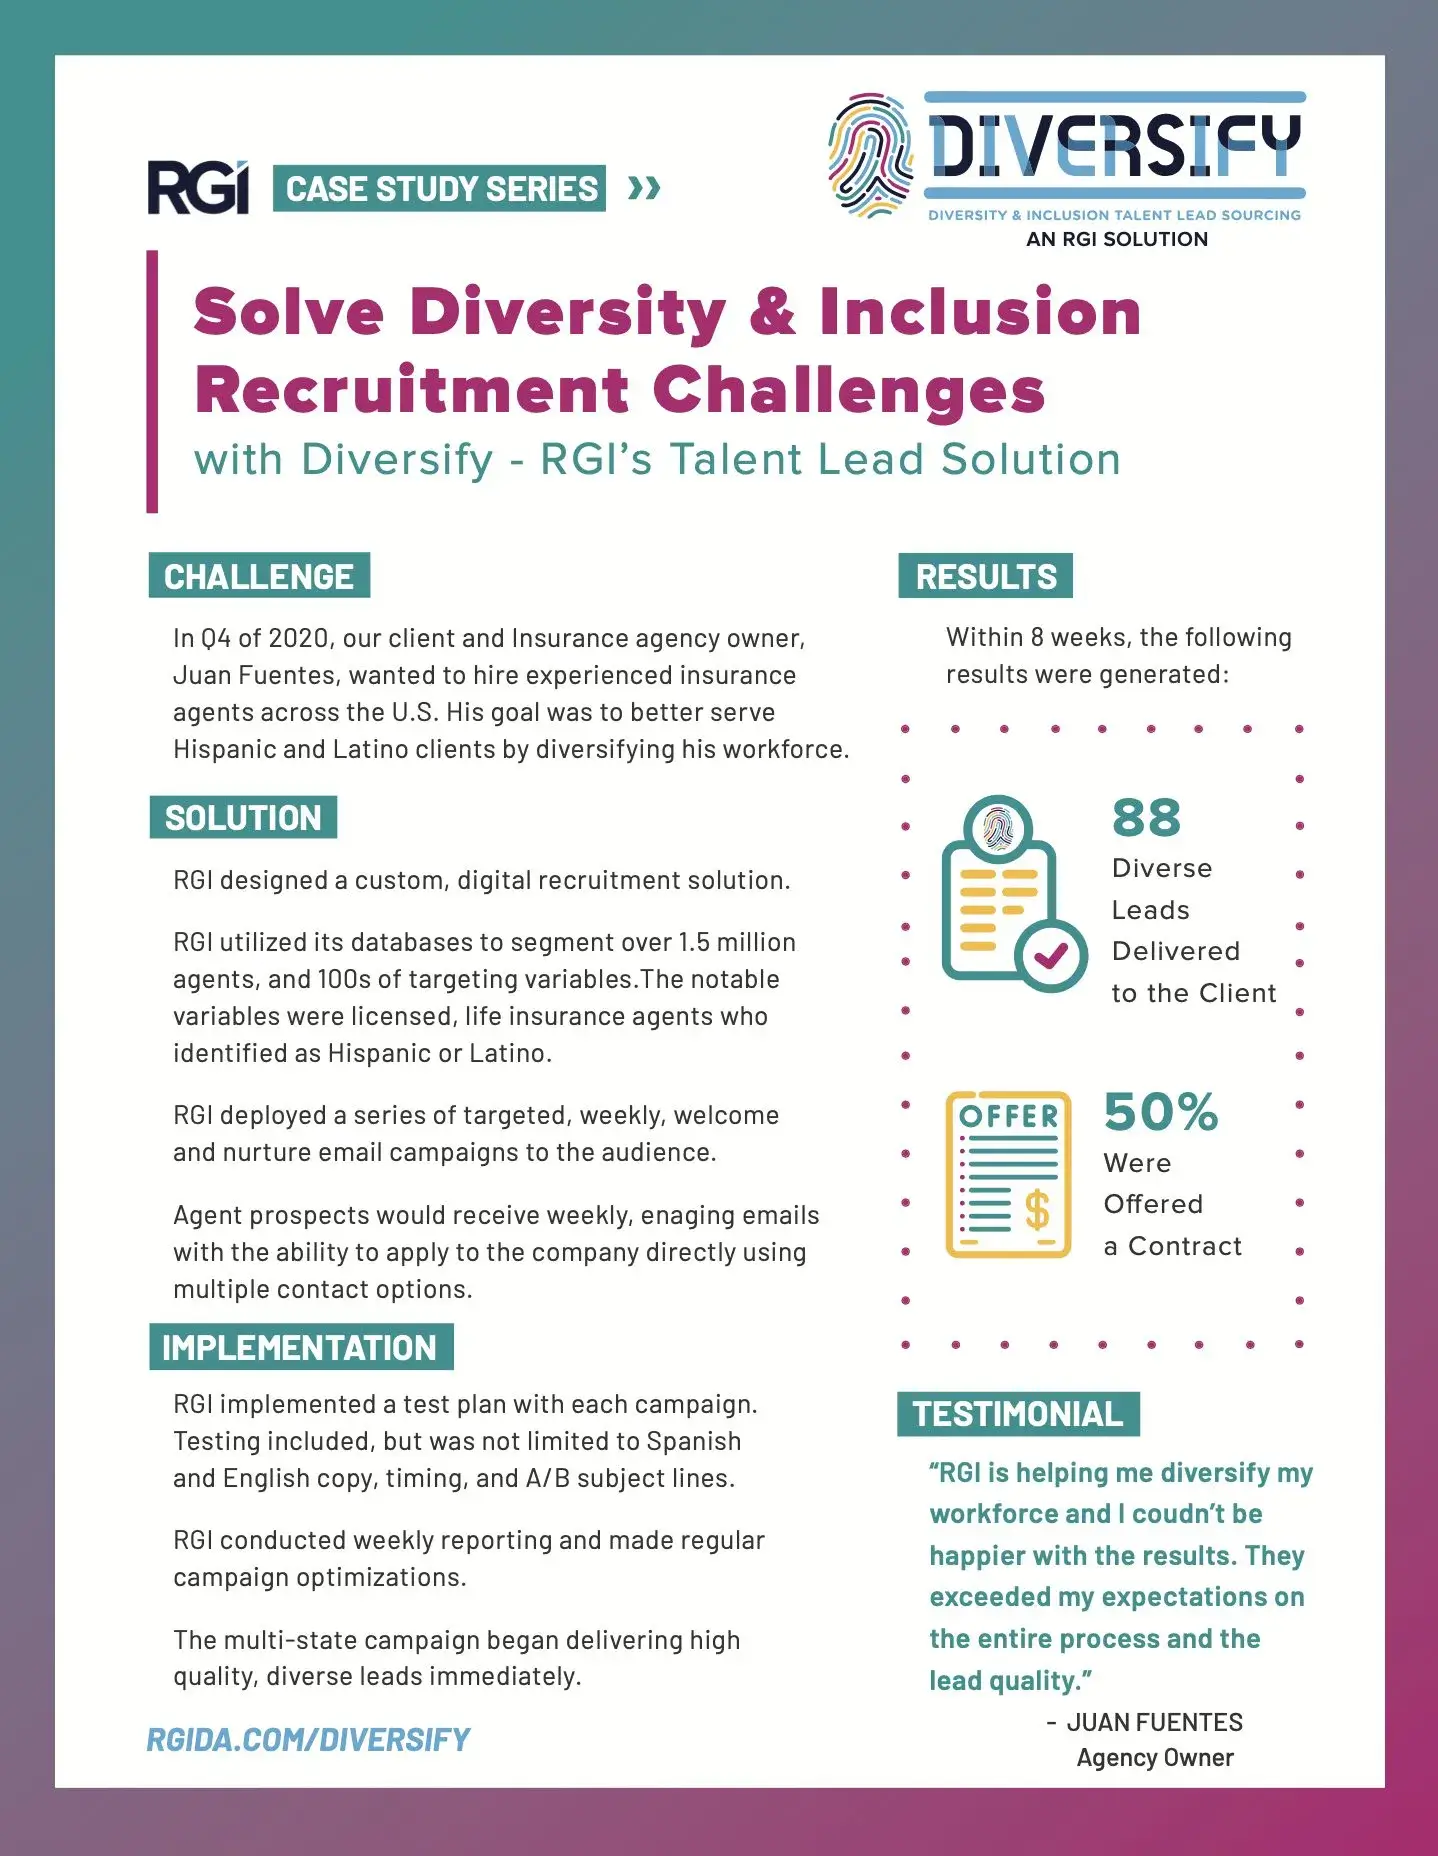 pdf image of inclusion challenges